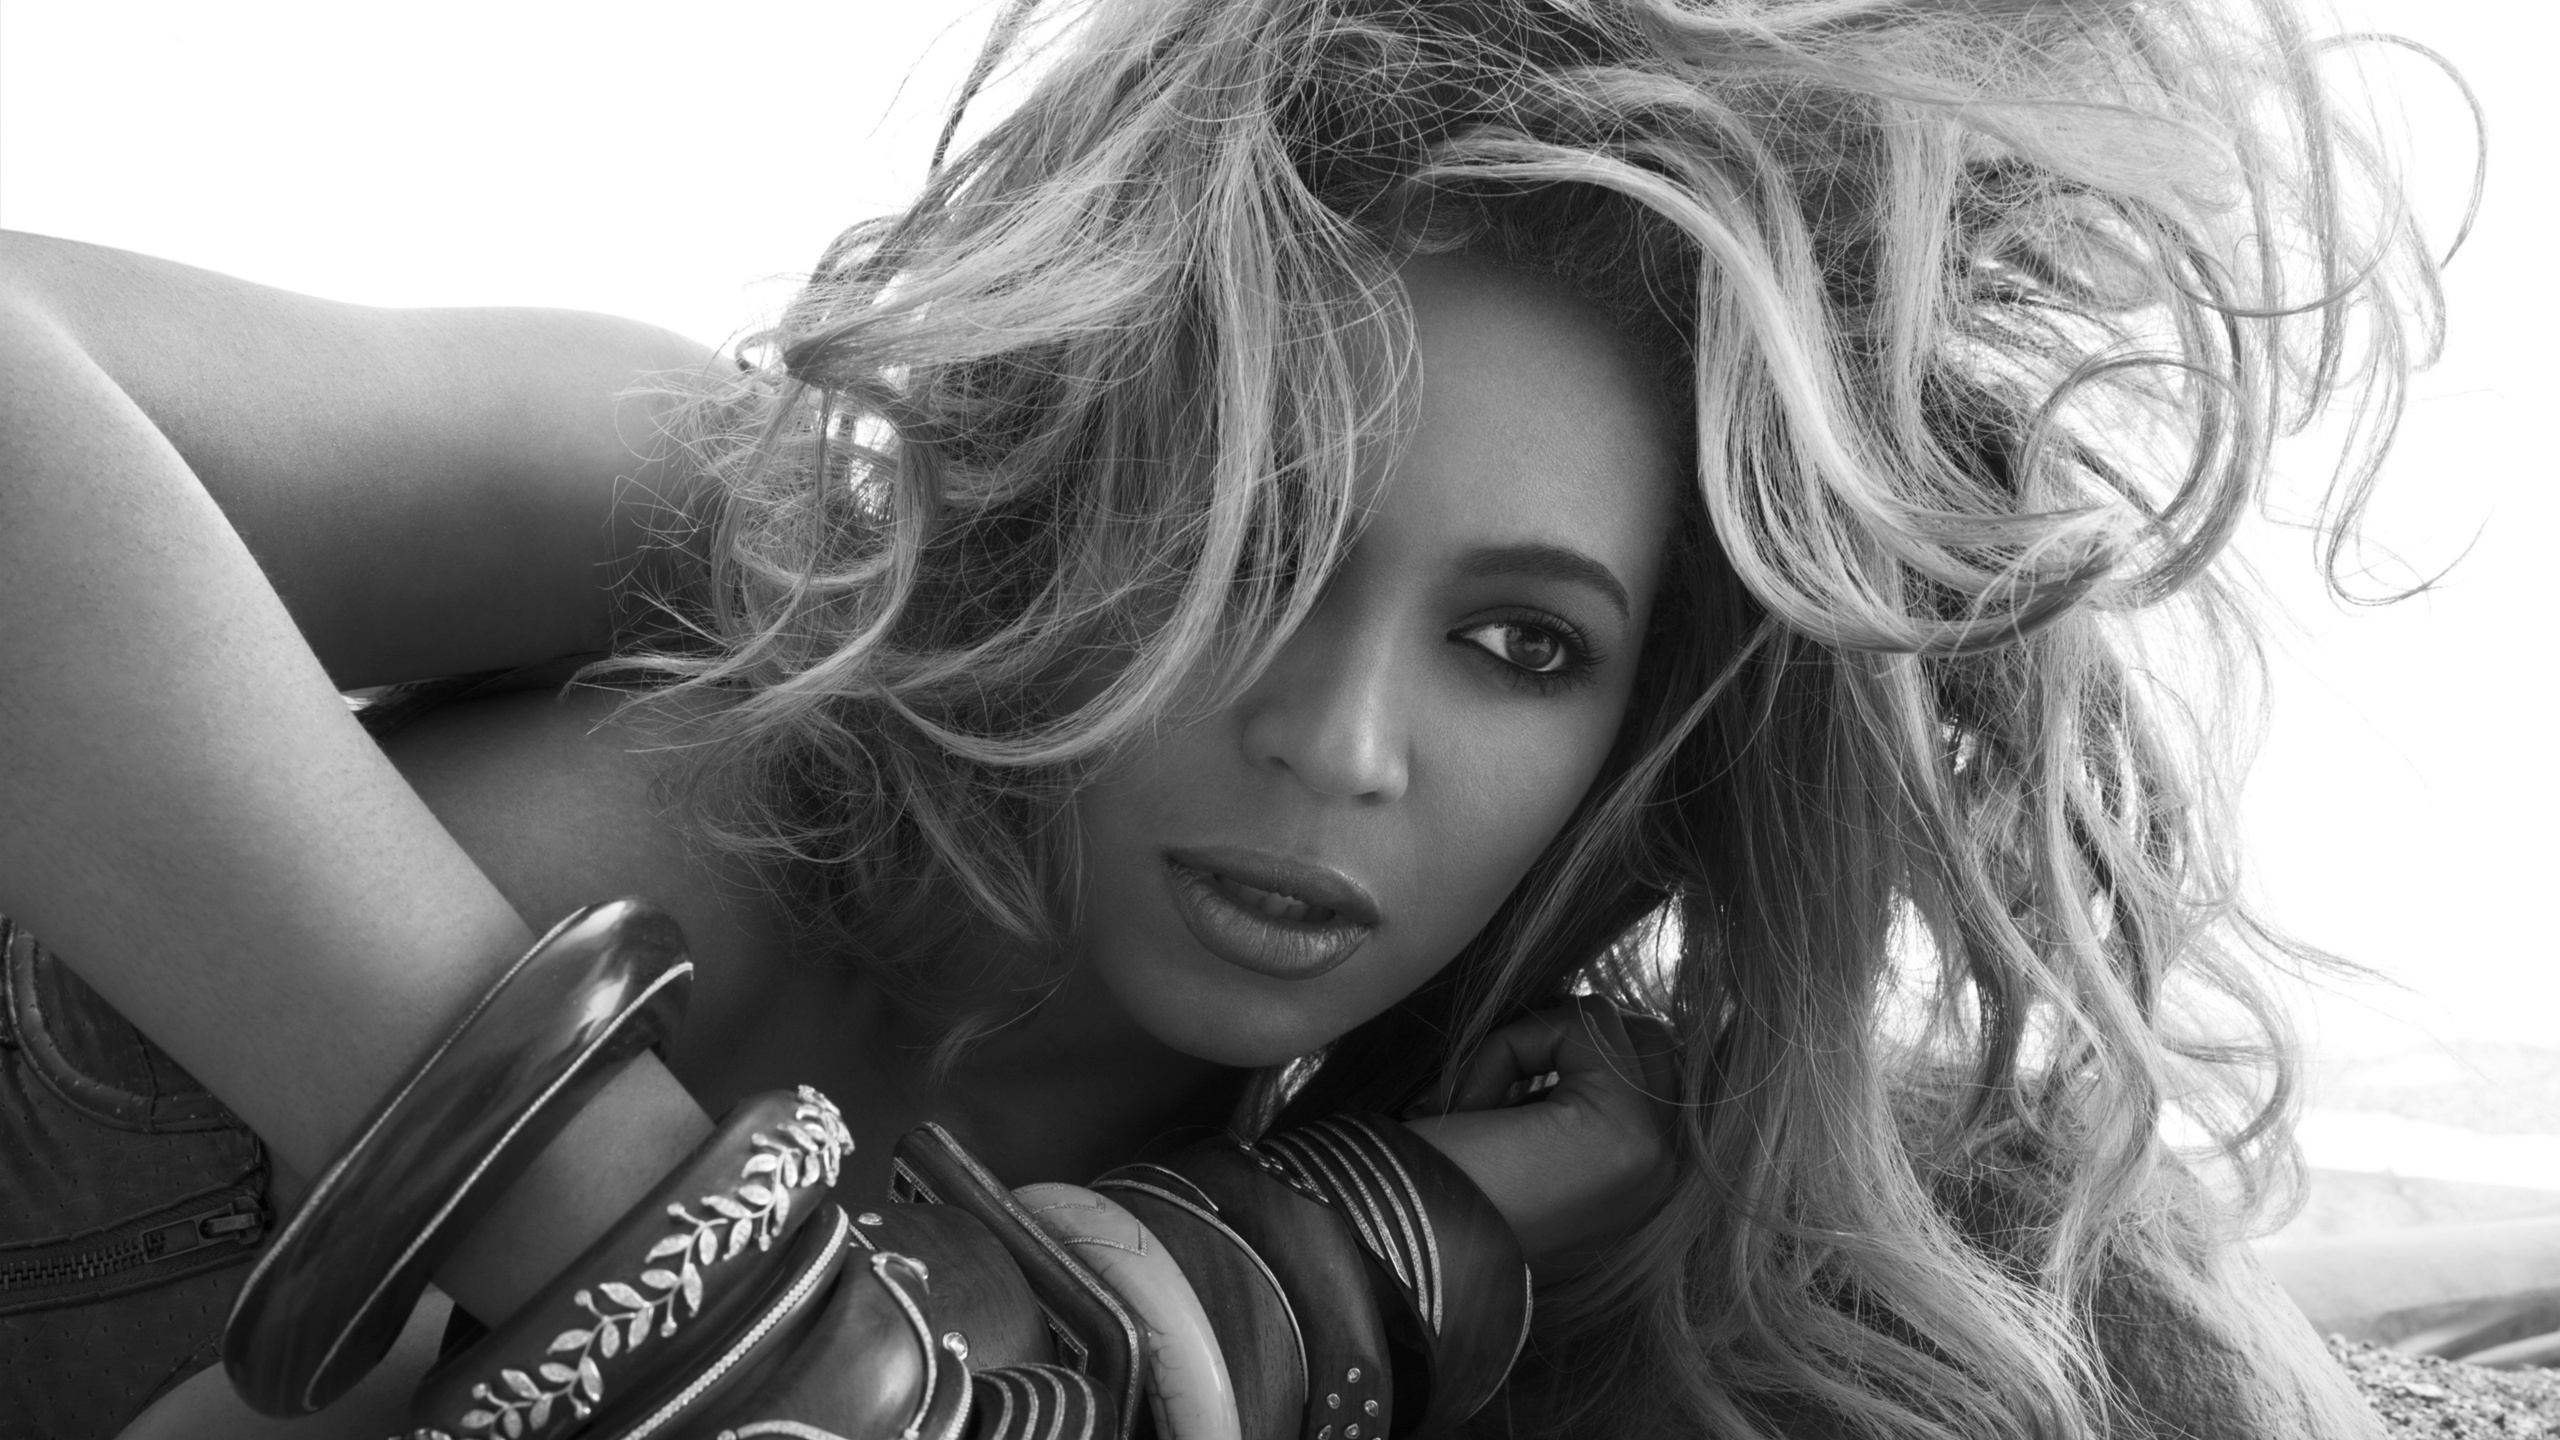 Beyonce Monochrome for 2560x1440 HDTV resolution